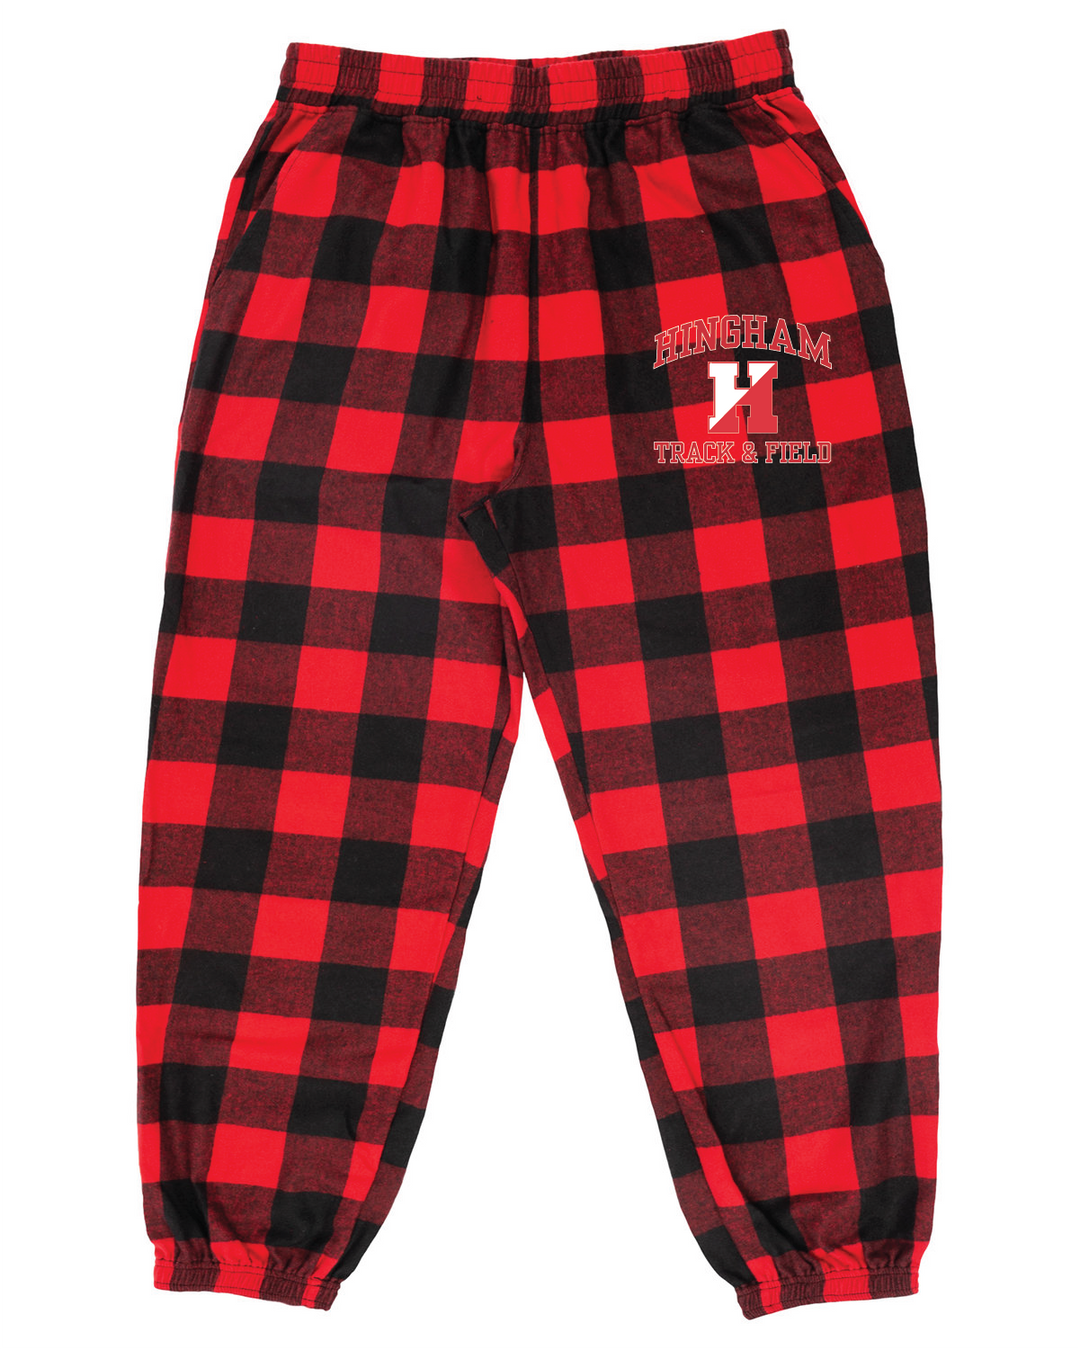 Unisex Hingham Track and Field Flannel Pants (B8810)